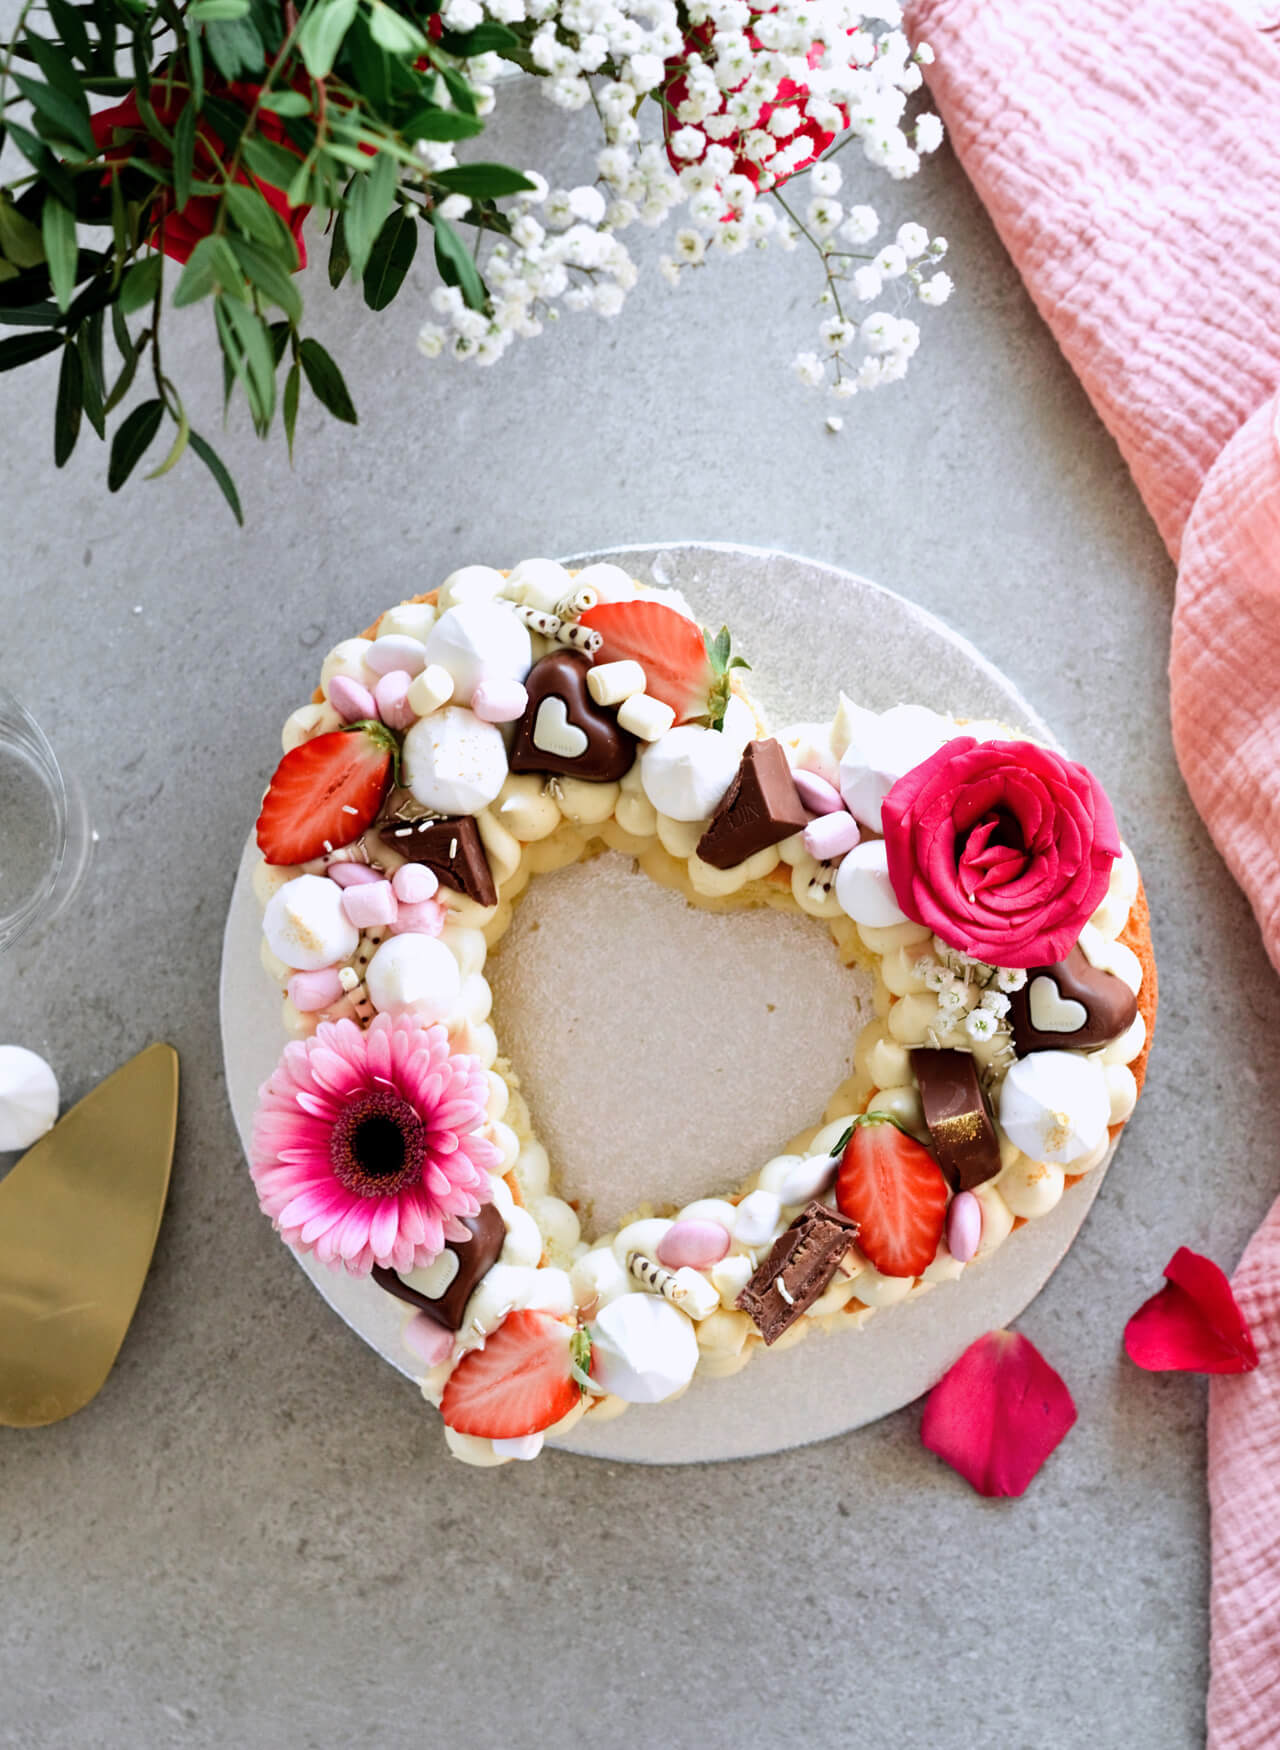 White chocolate cream cheese naked heart cake is the perfect spring or summer cake, topped with fresh berries and flowers it's eye-catching and pretty.